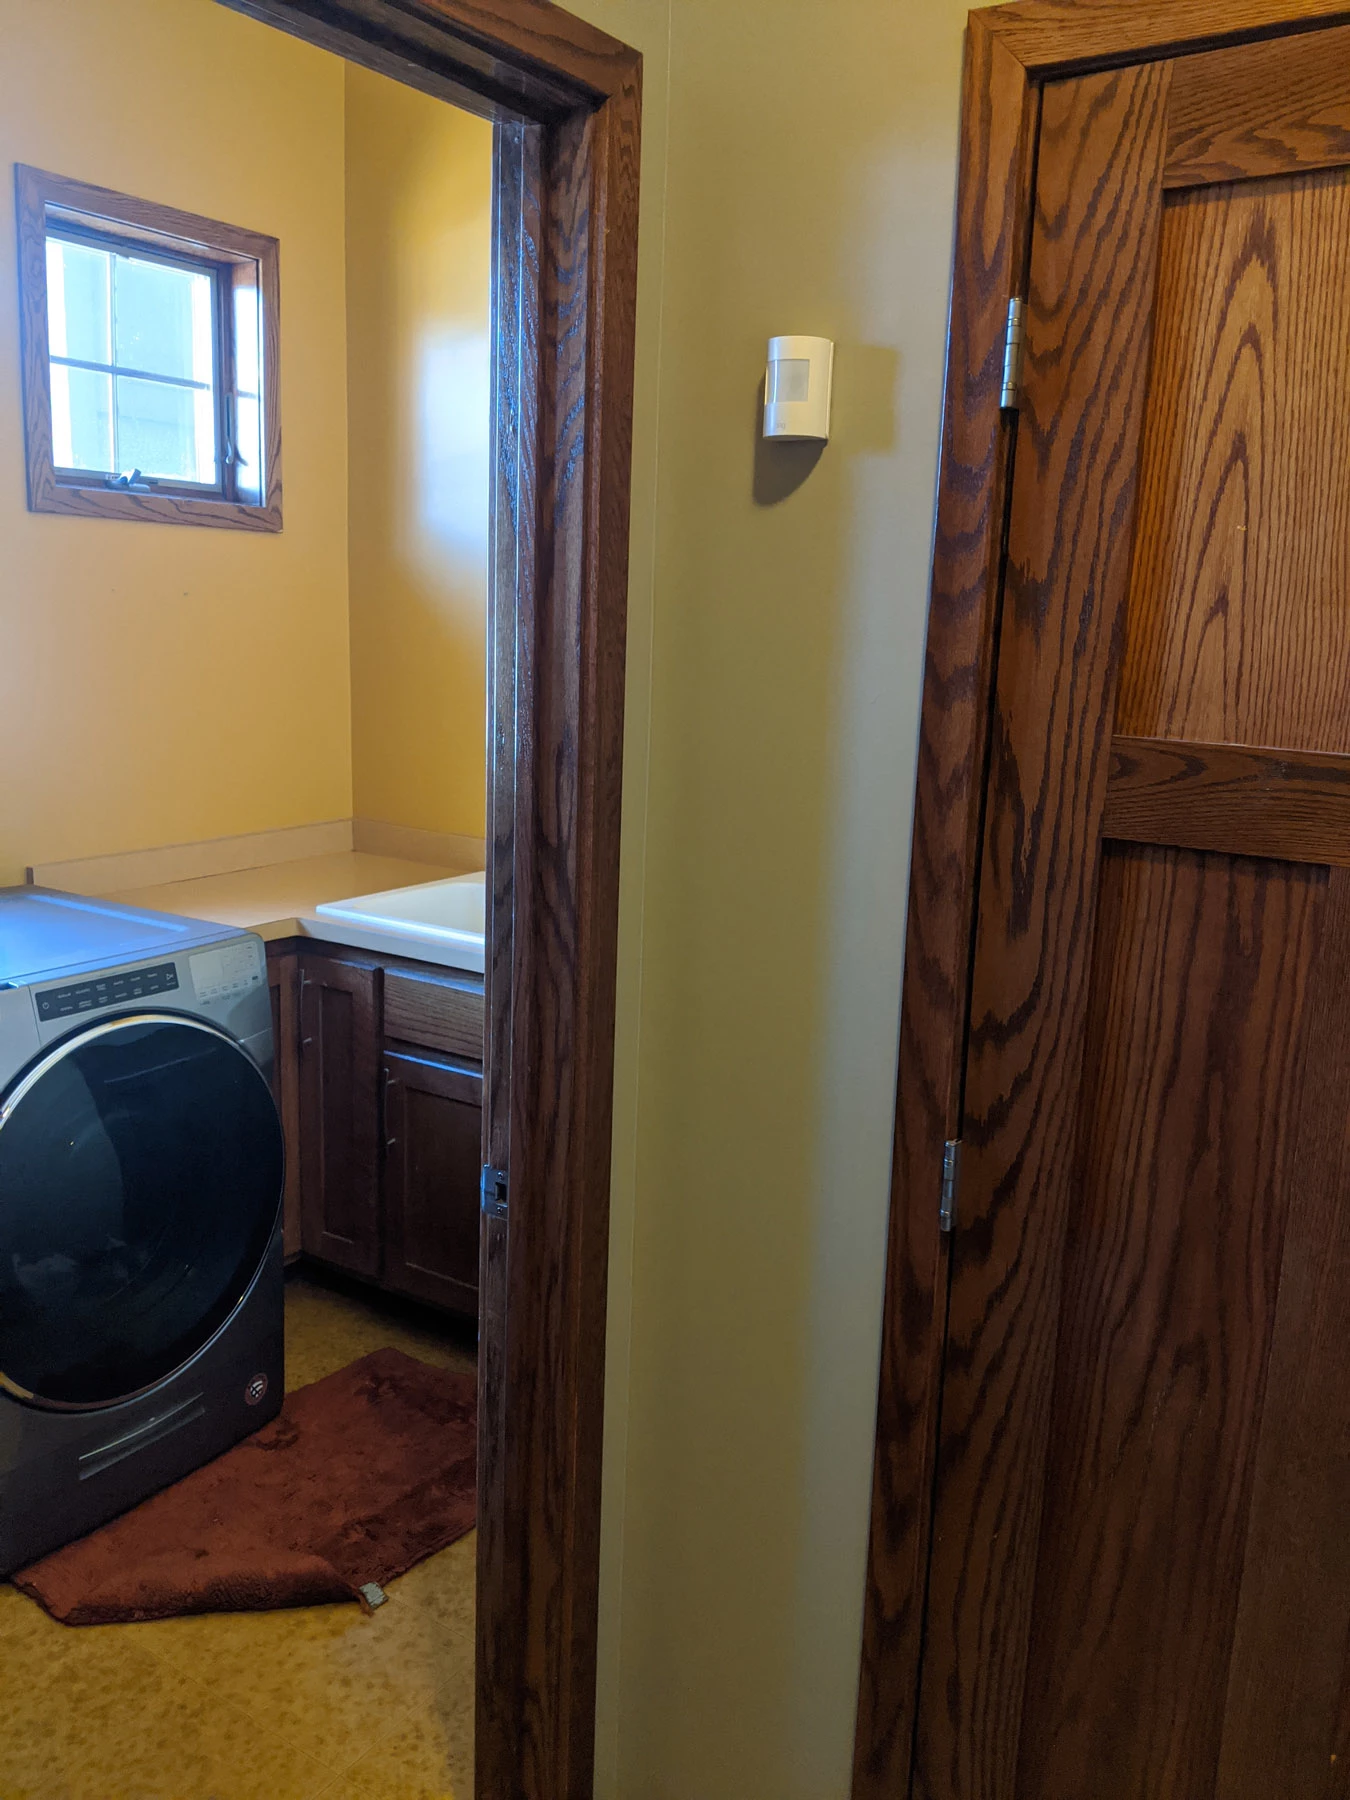 Laundry Room Before Remodel